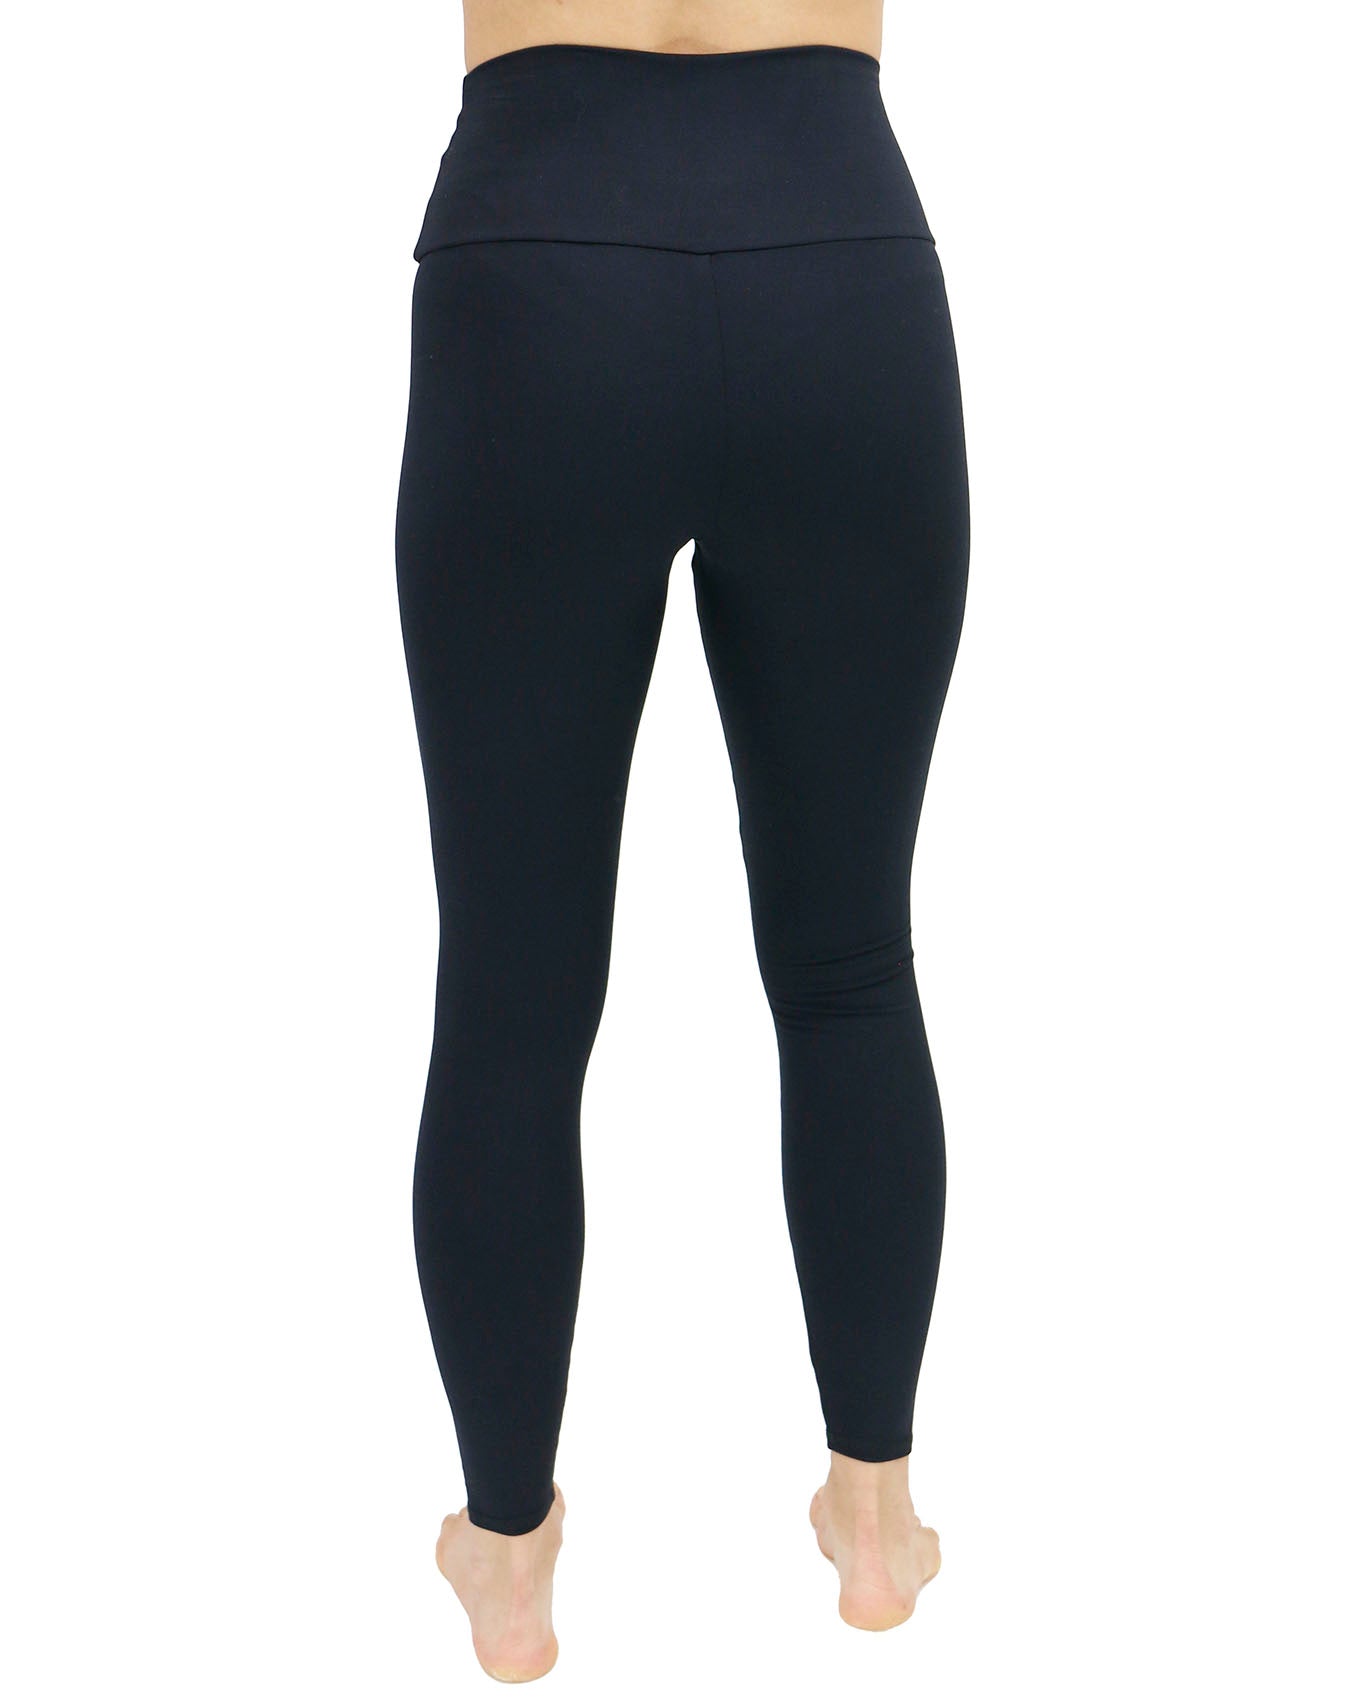 NEW Winter Thick Warm Compression Leggings For Women Fleece Lined